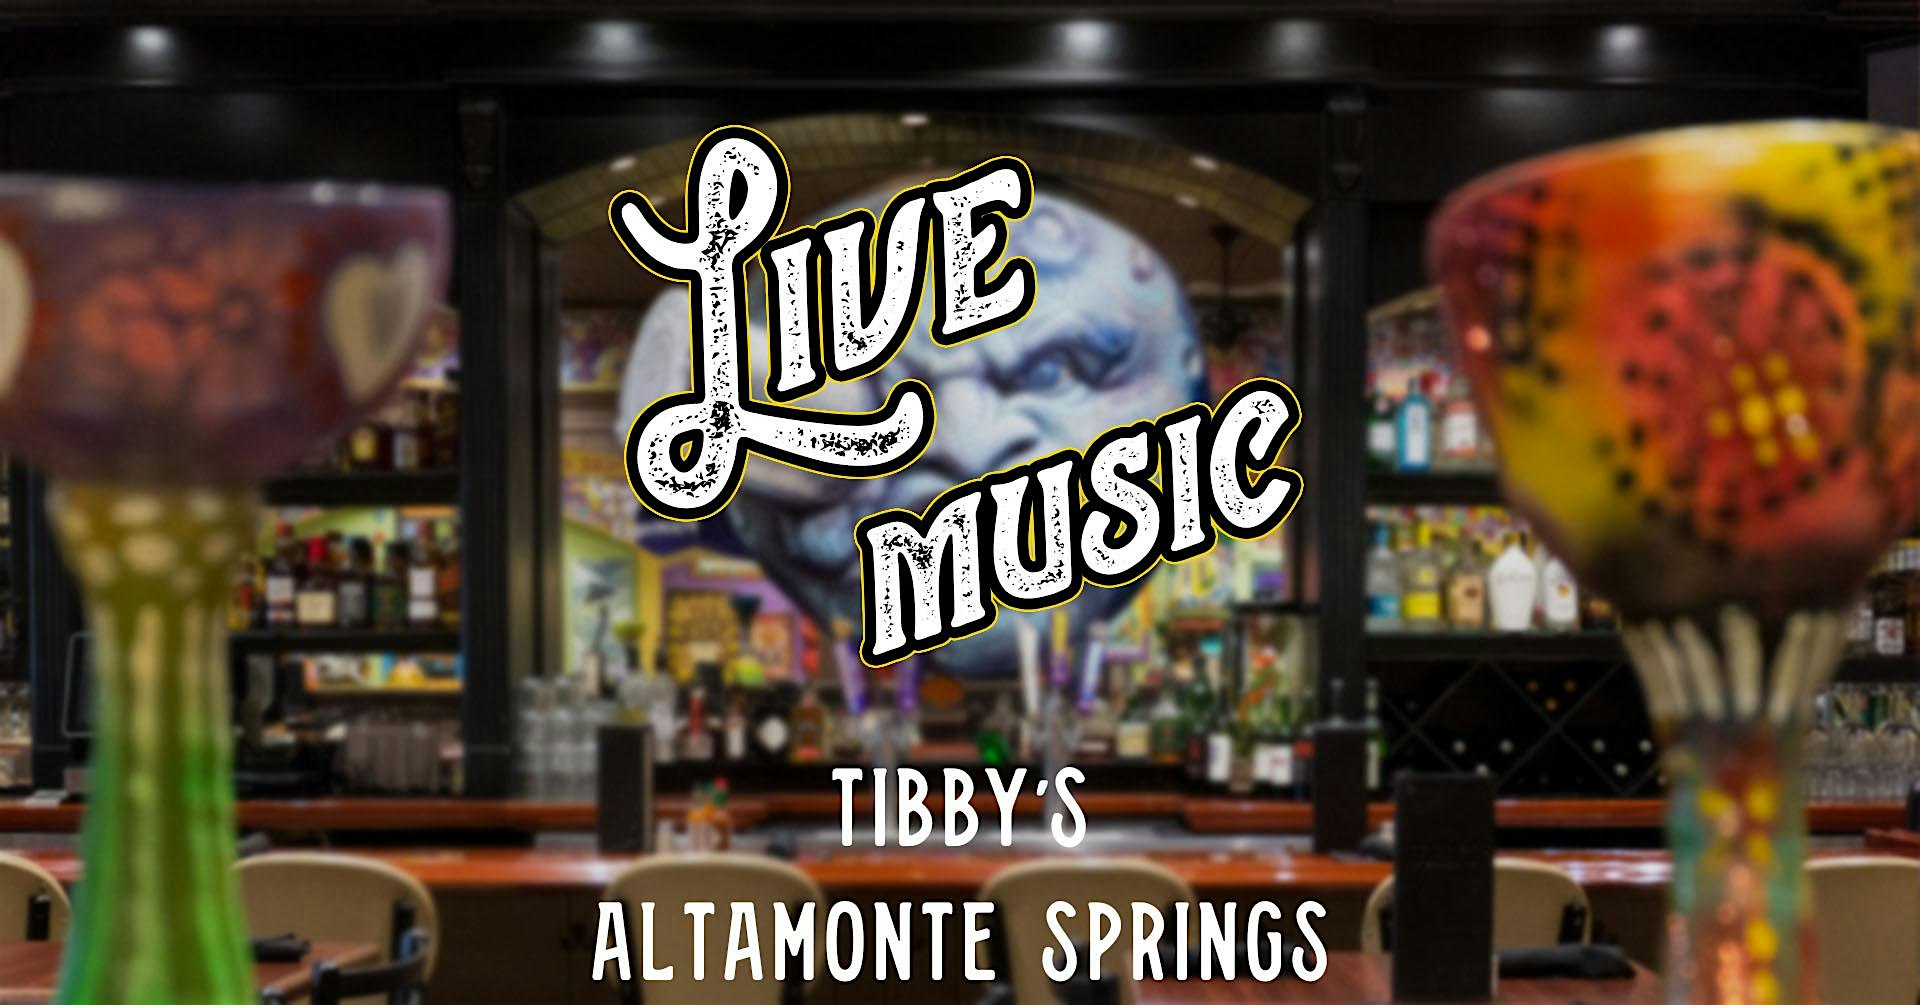 Sunday Brunch with Live Music by Live Hart at Tibbys in Altamonte Springs